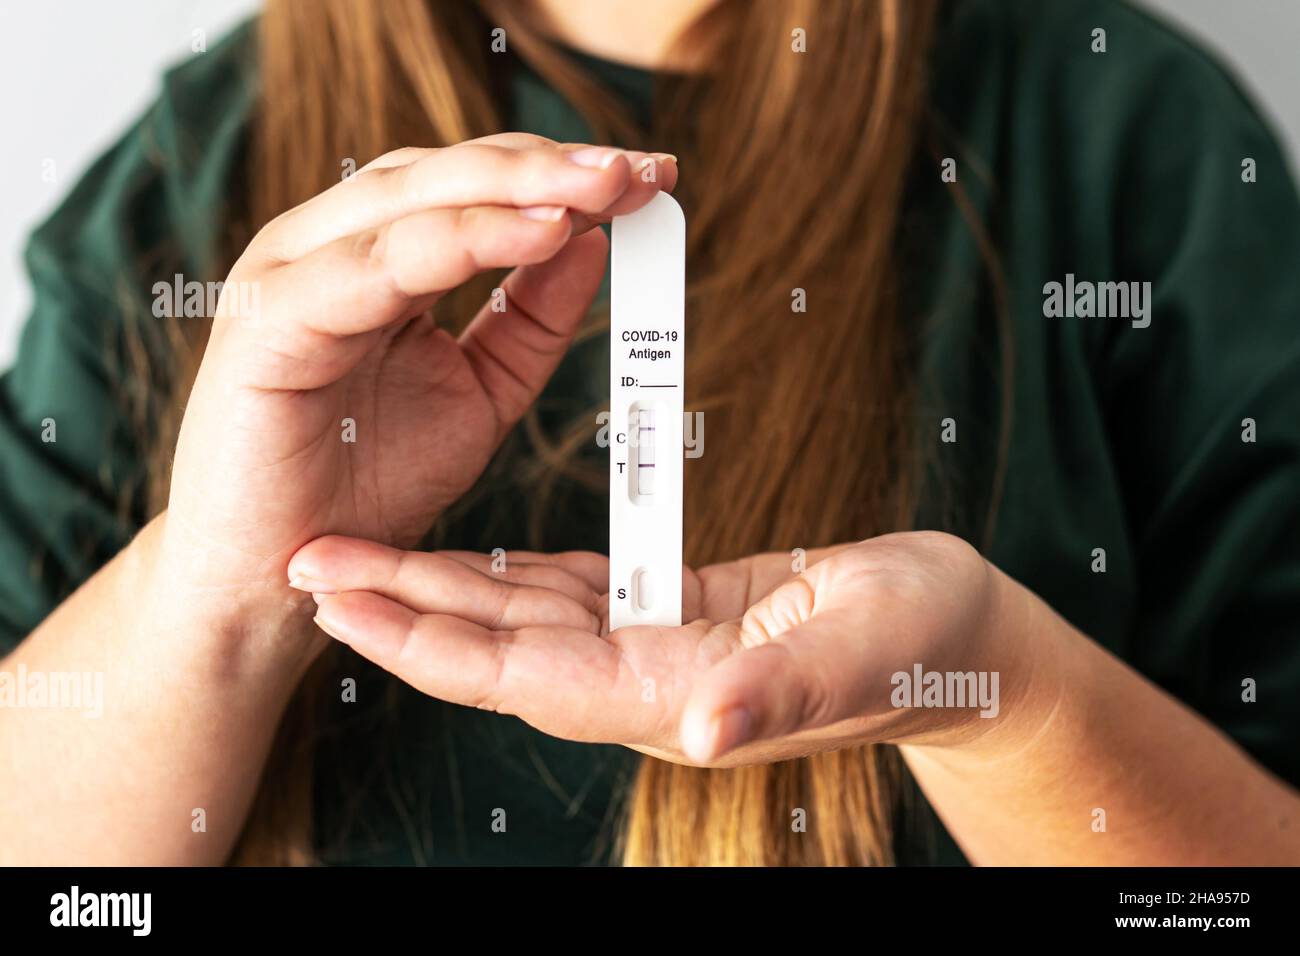 Positive rapid antigen COVID-19 test result in hands f unrecognizable person. Woman holds a quick coronavirus antigen rapid test kit card. Tested positive for COVID-19 concept. Stock Photo